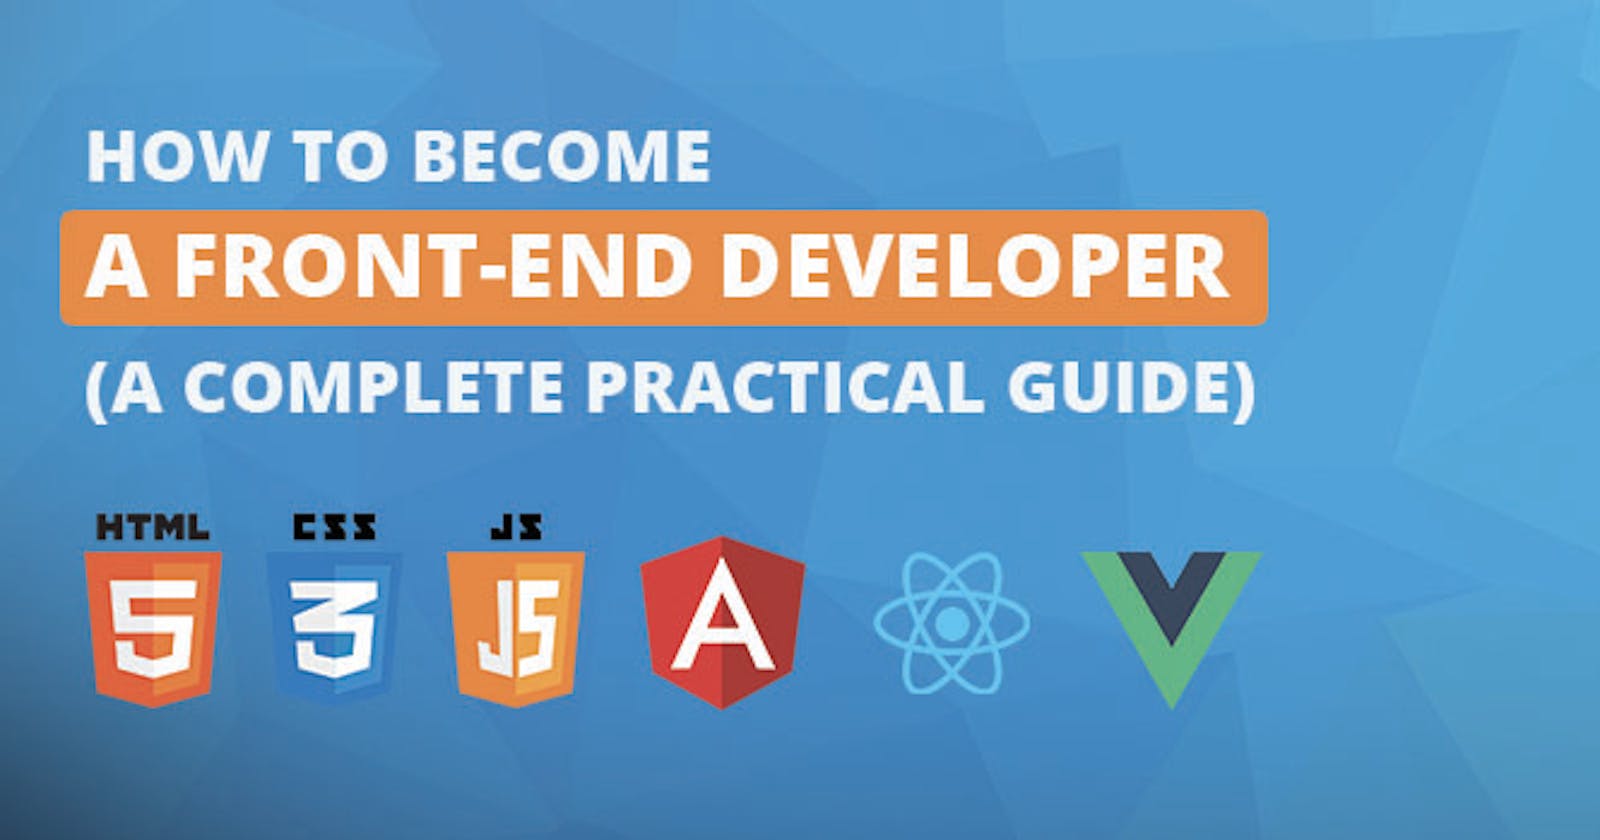 How to Become A Front-end Developer (A Complete Practical Guide)